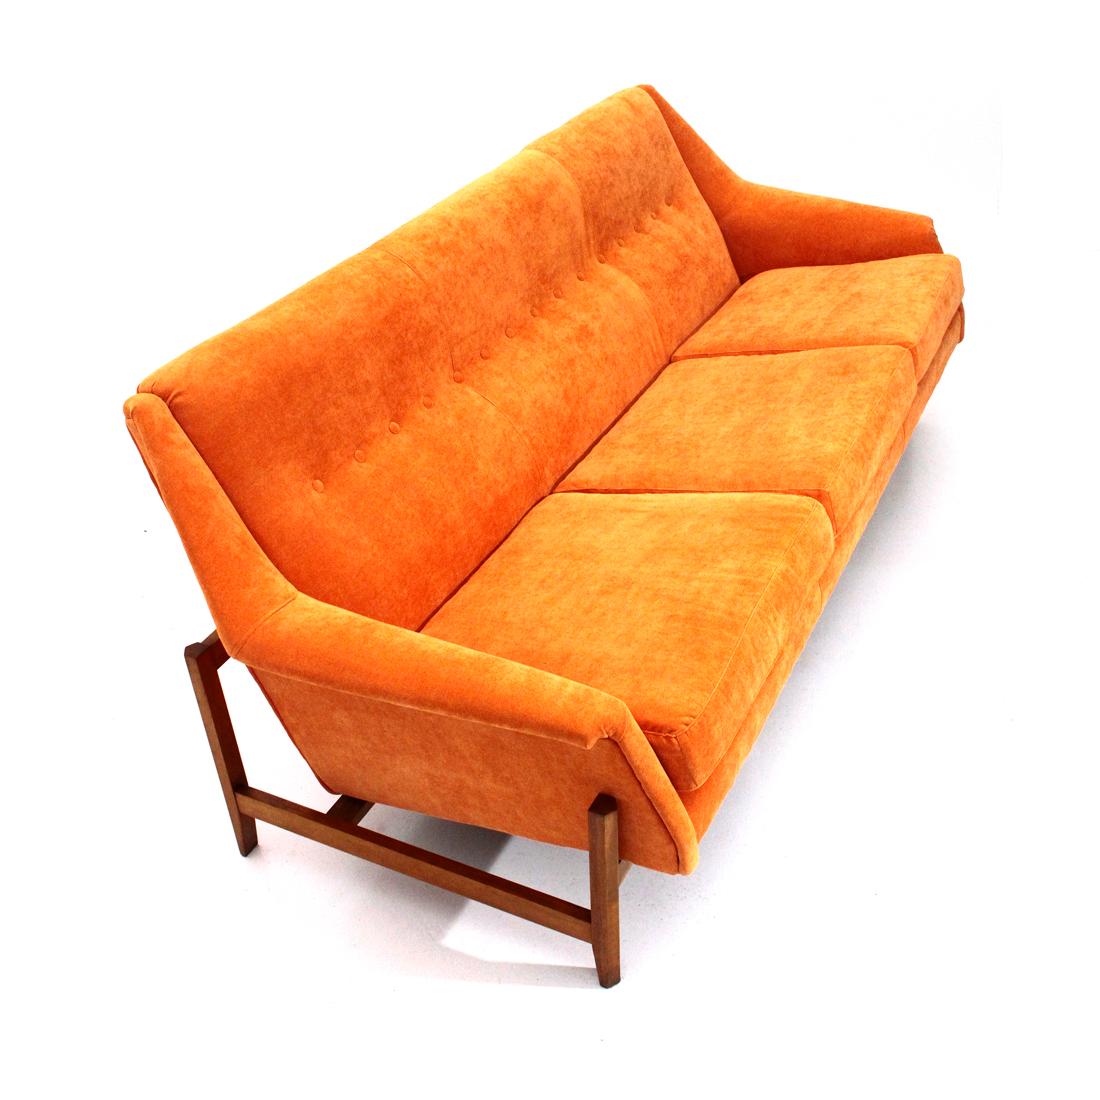 Three-seat sofa of Italian manufacture produced in the 1960s.
Wooden base.
Wooden structure padded and lined with new orange velvet fabric.
Seat with three pillows.
Stitched back with buttons.
Good general condition, some marks on the wooden